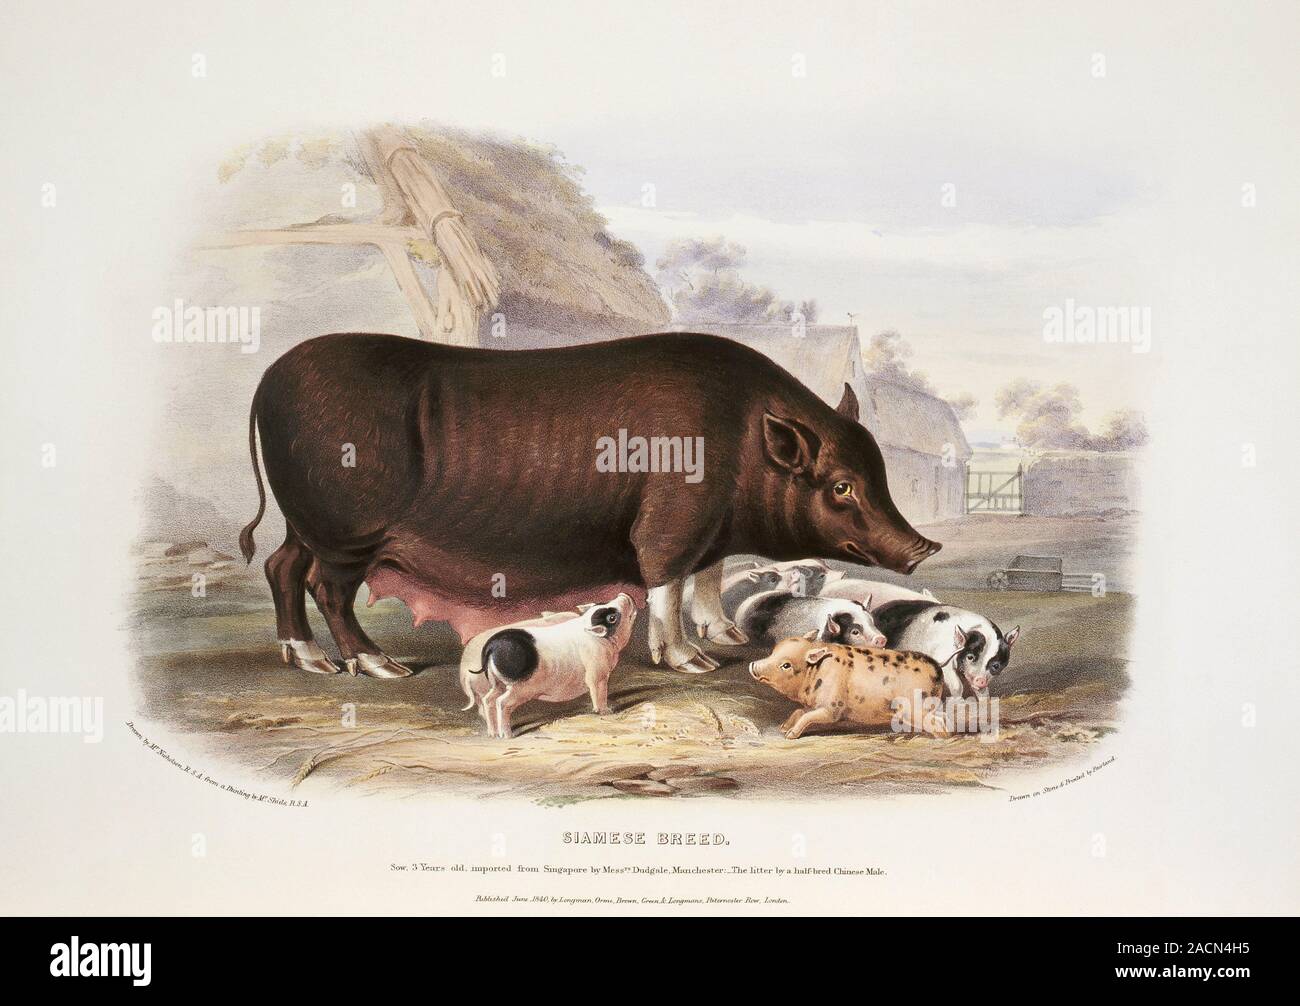 Siamese Pig 19th Century Artwork Of A Sow And Piglets Of The Siamese